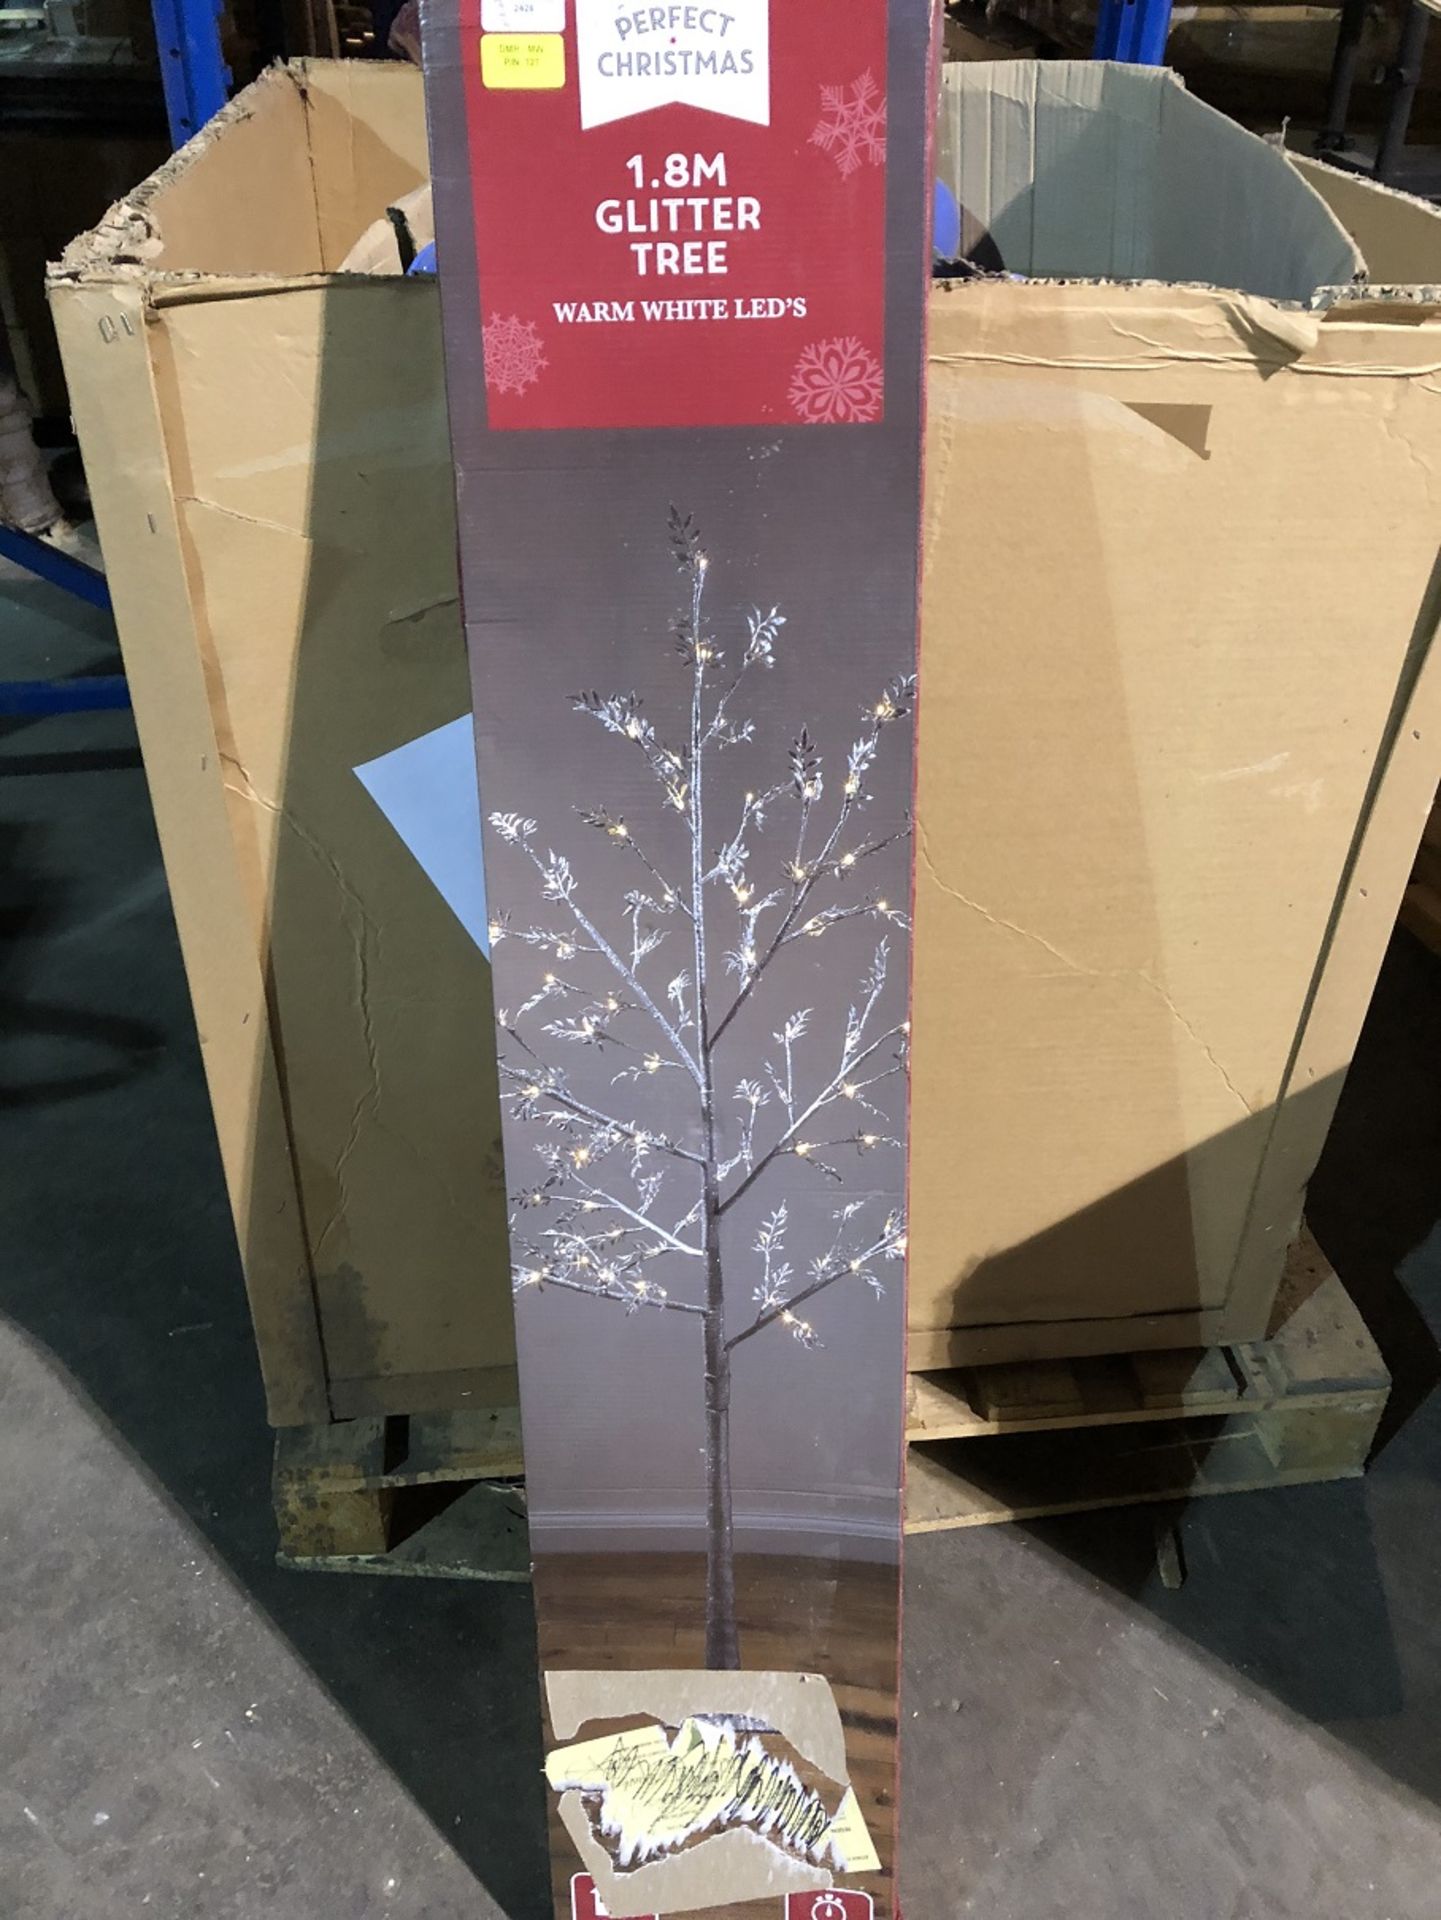 1 BOXED PERFECT CHRISTMAS 1.8M GLITTER TREE WITH WARM WHITE LED / RRP £69.99 (PUBLIC VIEWING